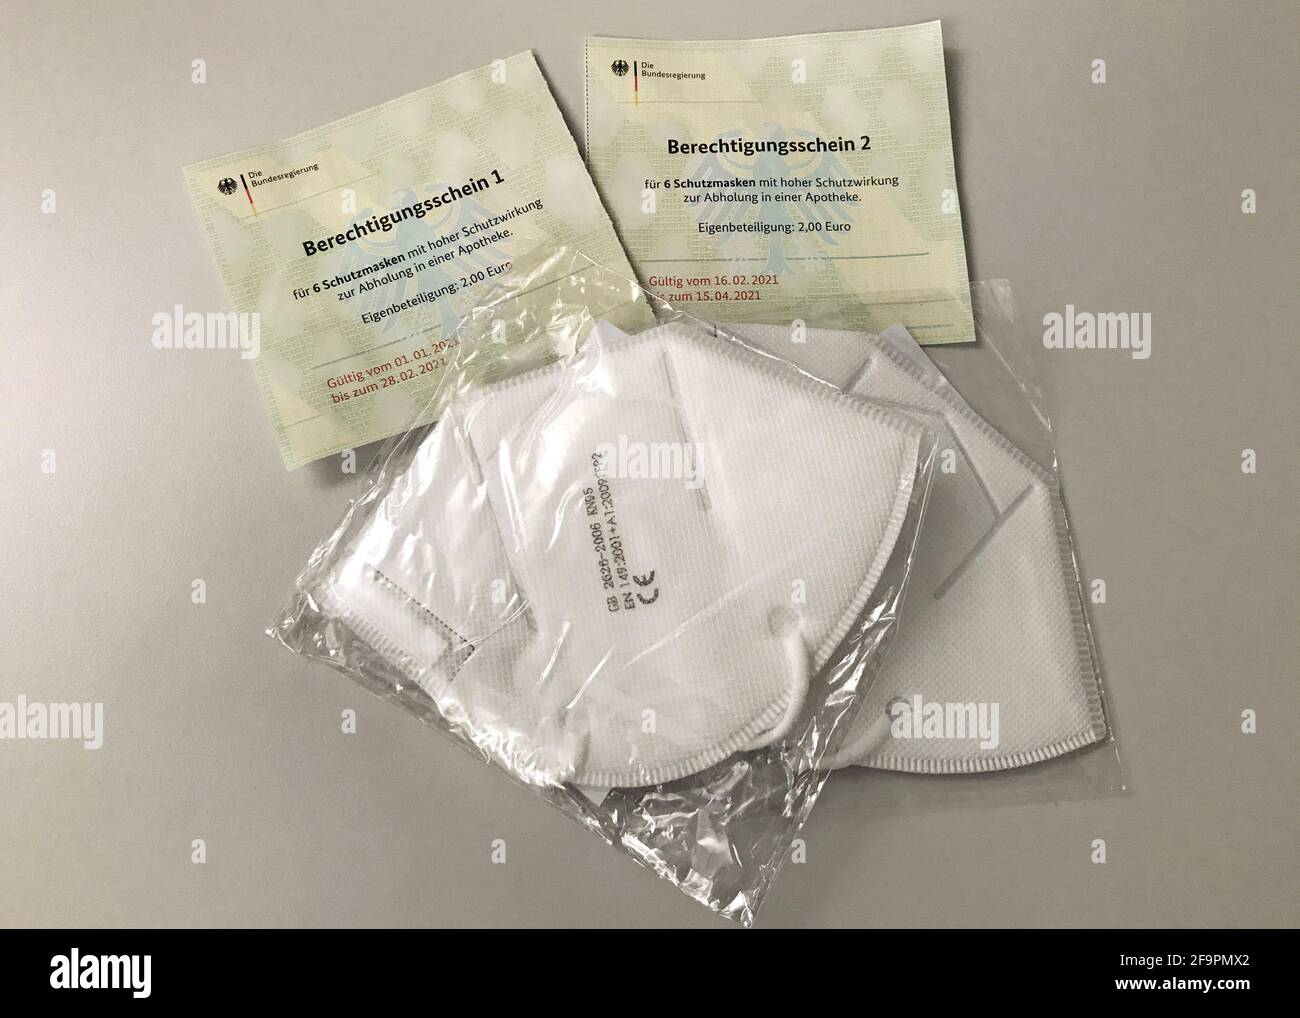 26.01.2021, Berlin, , Germany - FFP2 masks are on authorization slips from the federal government to pick up protective masks at the pharmacy. 00S2101 Stock Photo